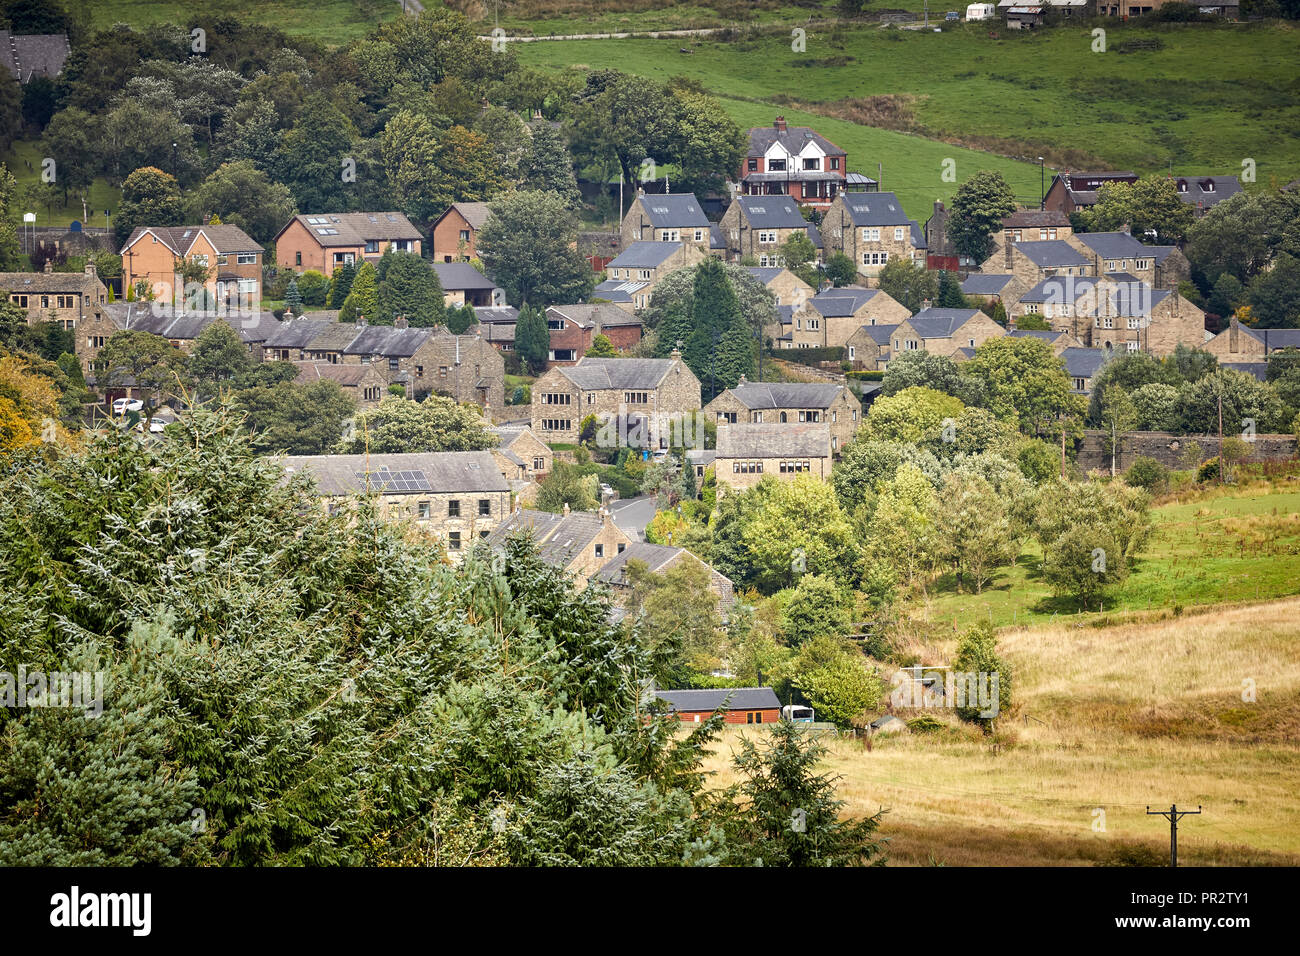 Housing stock in the rural valley village Denshaw in Saddleworth a civil parish of the Metropolitan Borough of Oldham, Greater Manchester, England Stock Photo